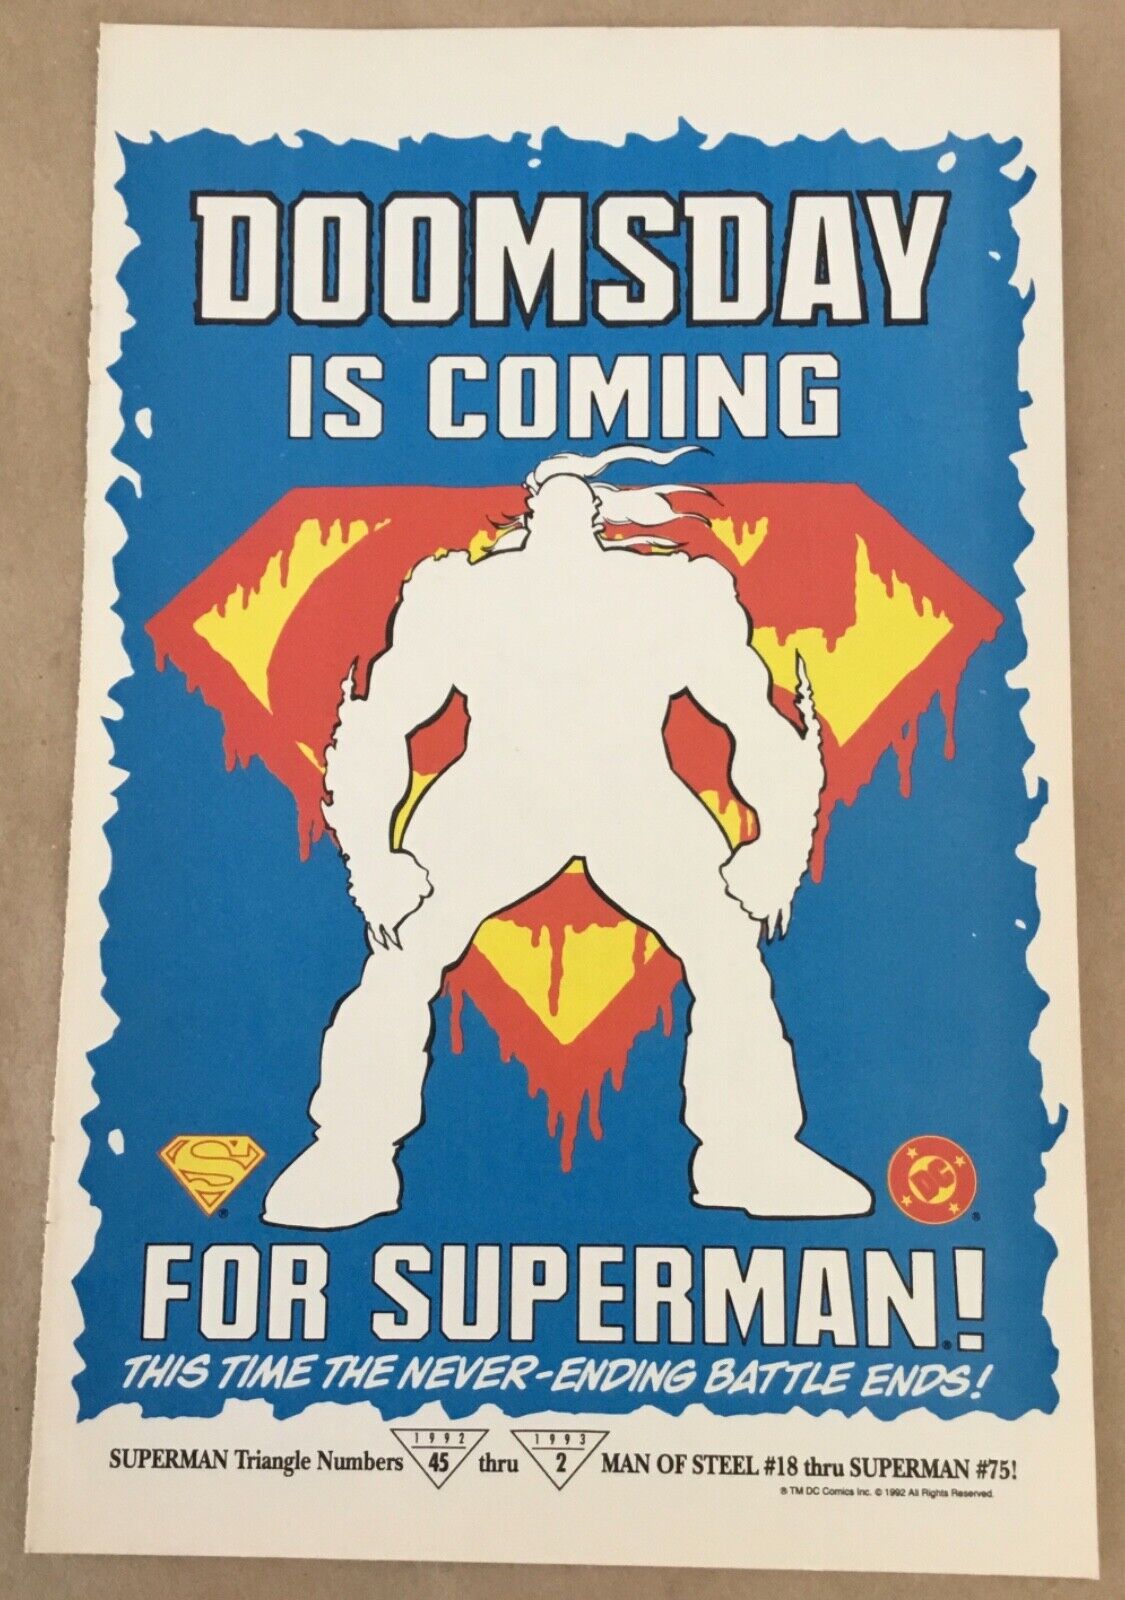 Superman Doomsday is Coming Print Ad 1992 promo art comic book illustration 90s